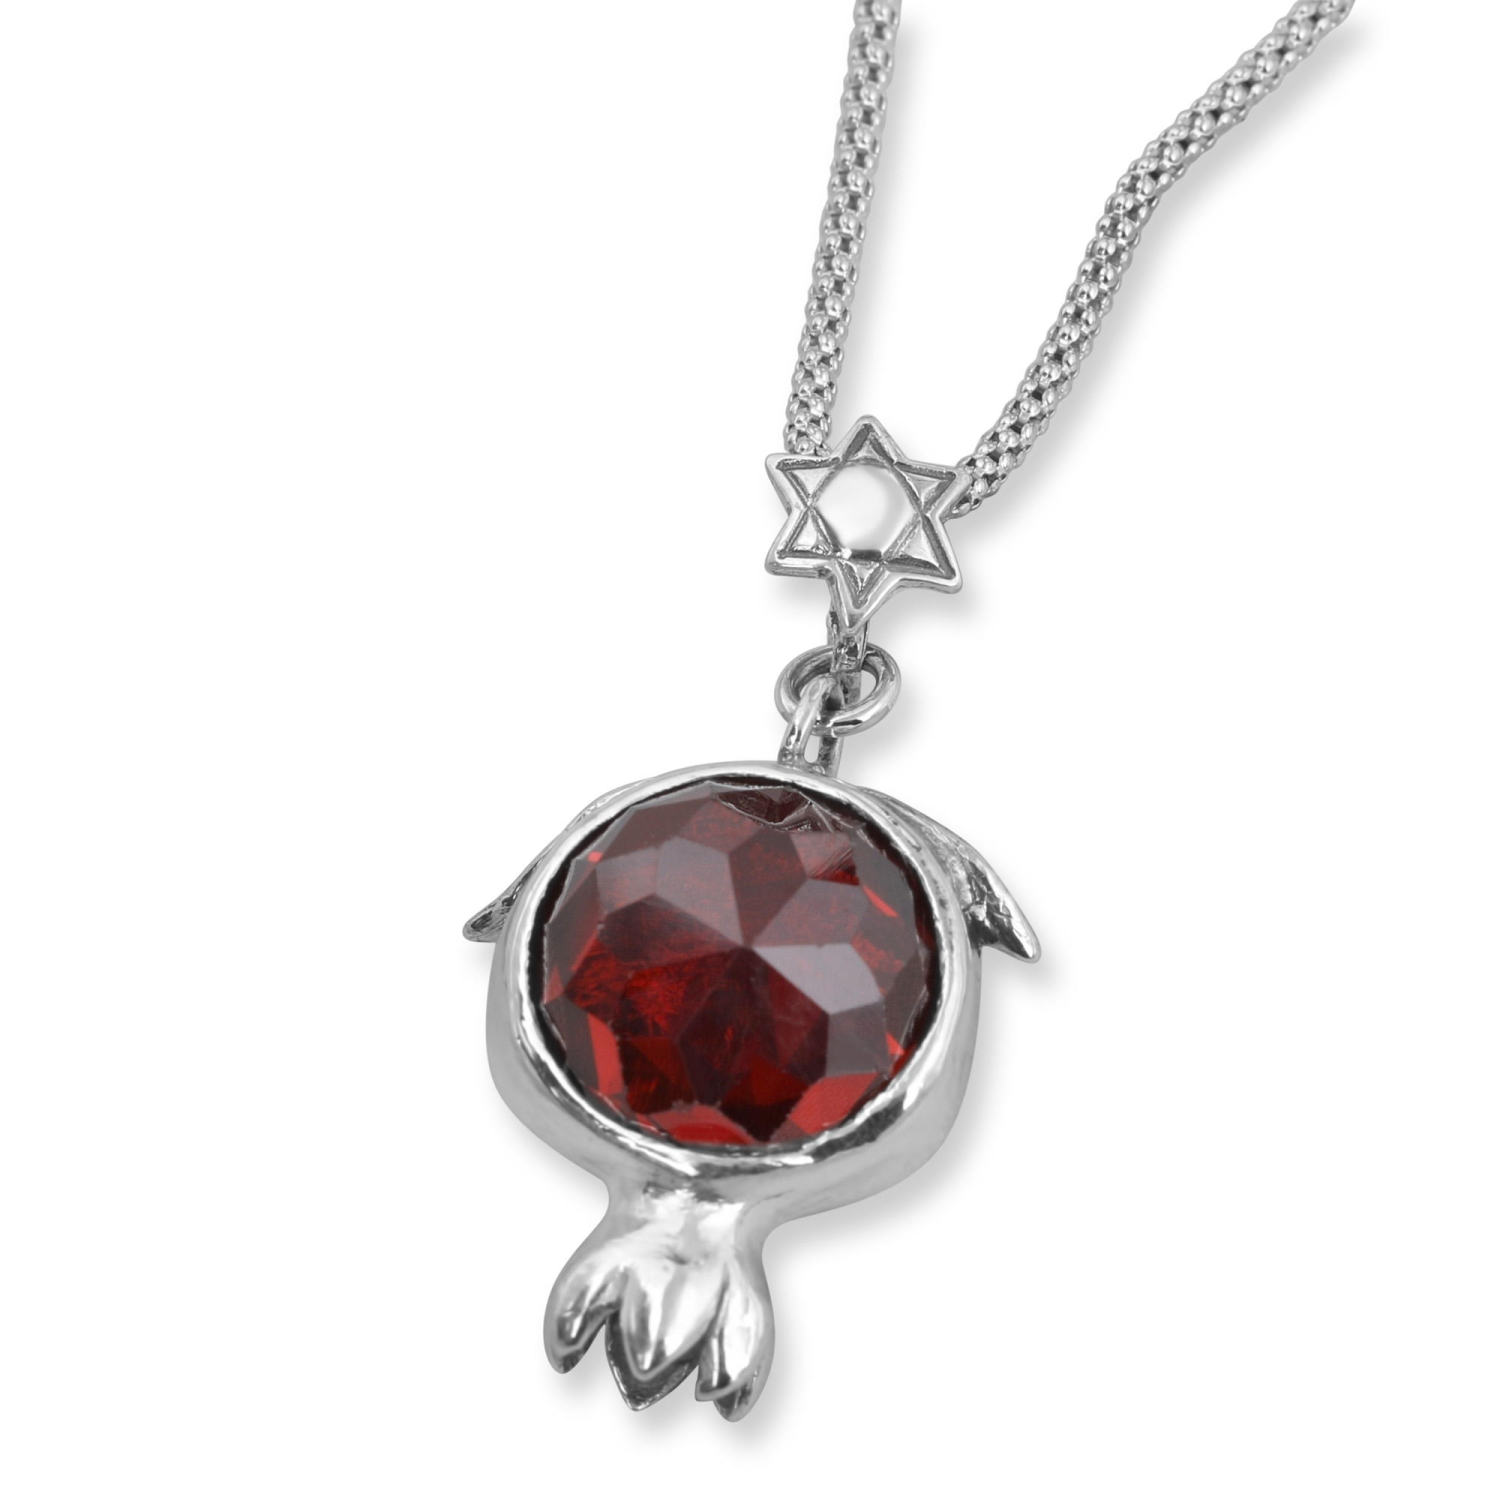 Sterling Silver and Garnet Pomegranate Necklace with Star of David Detail - 1